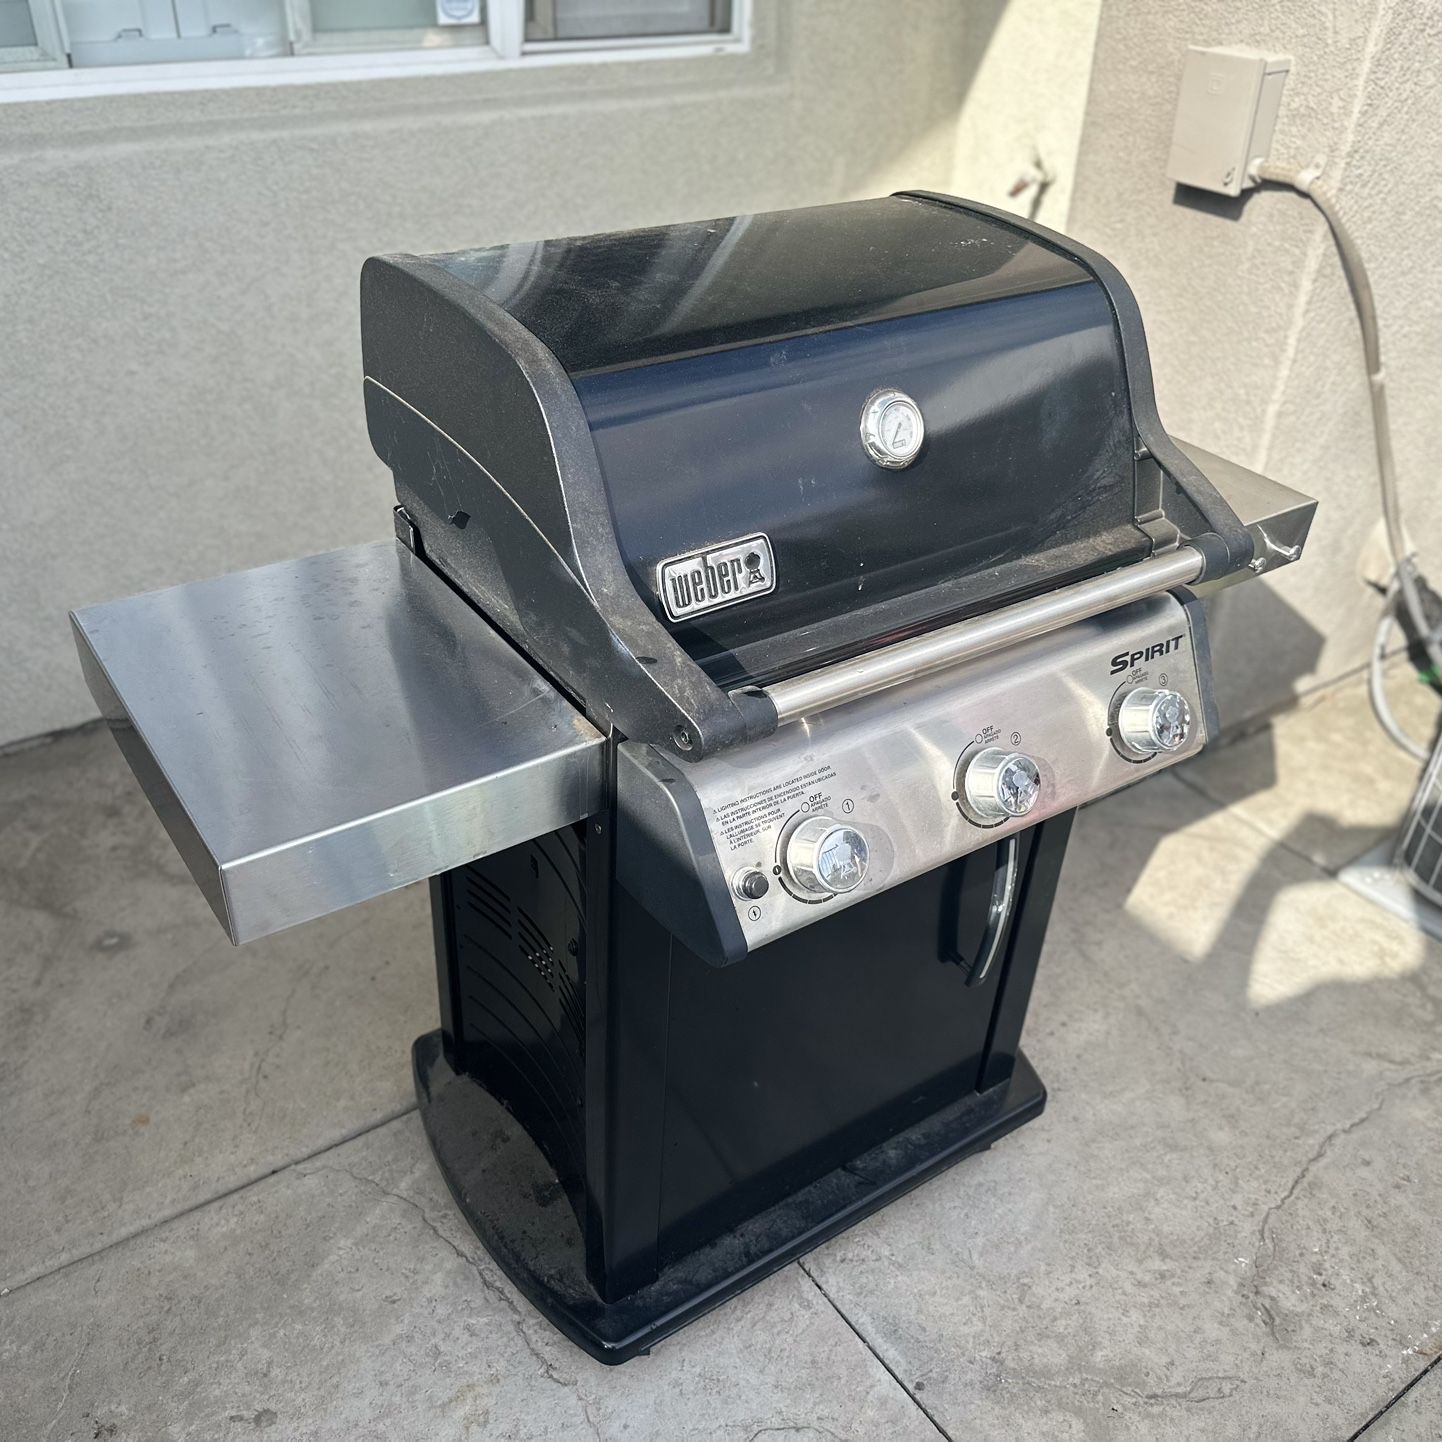 Weber BBQ Grill With Cover